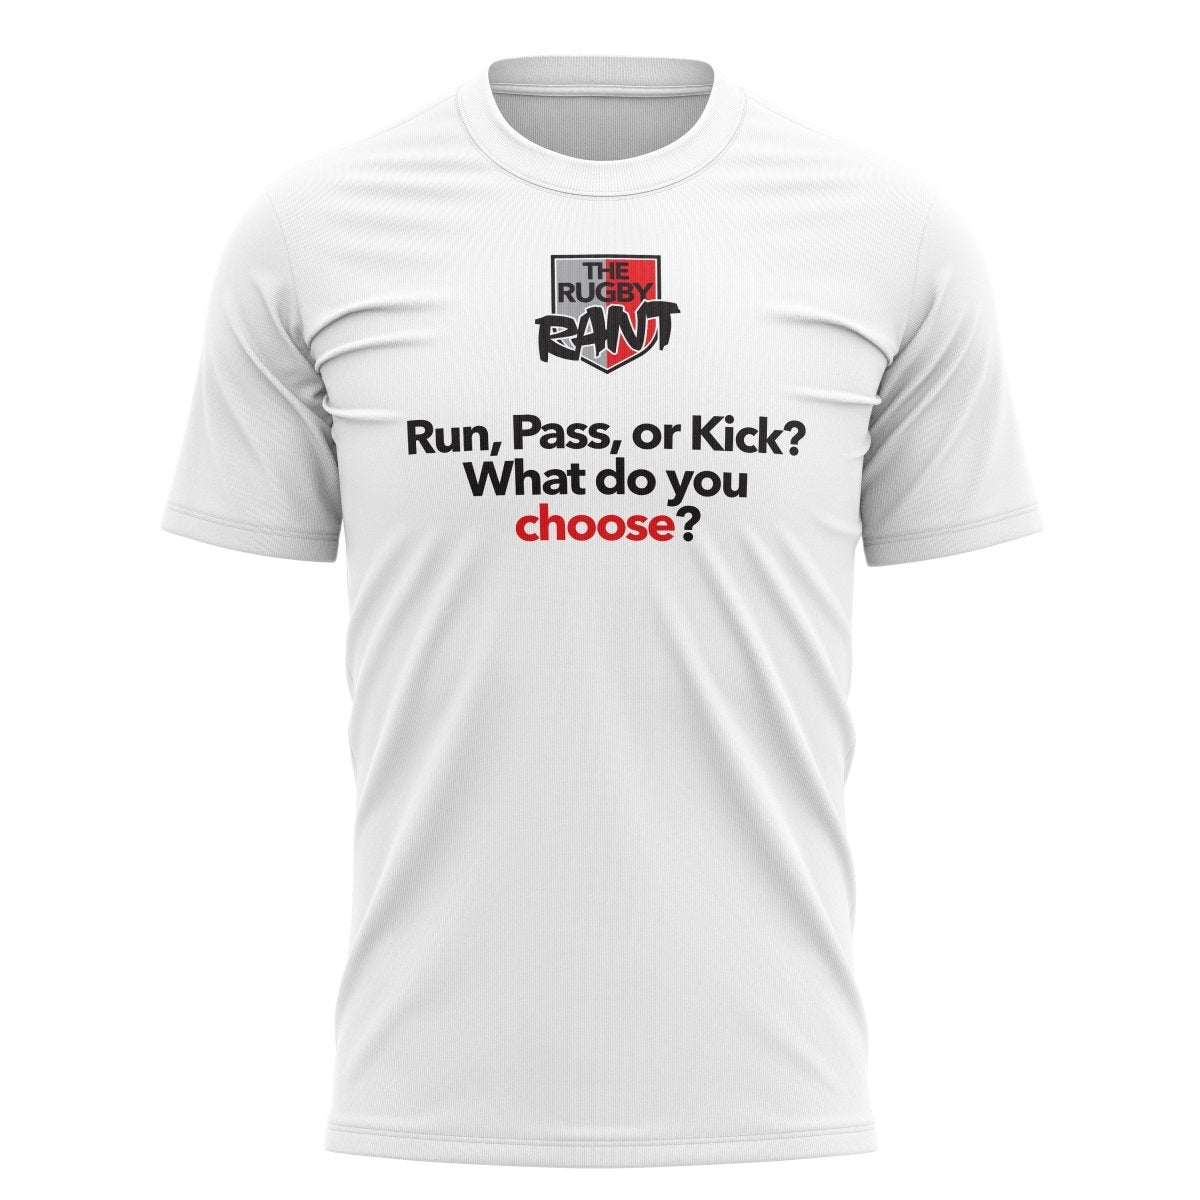 The Rugby Rant &quot;Run, Pass, or Kick?&quot; Tee - Unisex - www.therugbyshop.com www.therugbyshop.com ADULT UNISEX / BLACK / S SANMAR TEES The Rugby Rant &quot;Run, Pass, or Kick?&quot; Tee - Unisex